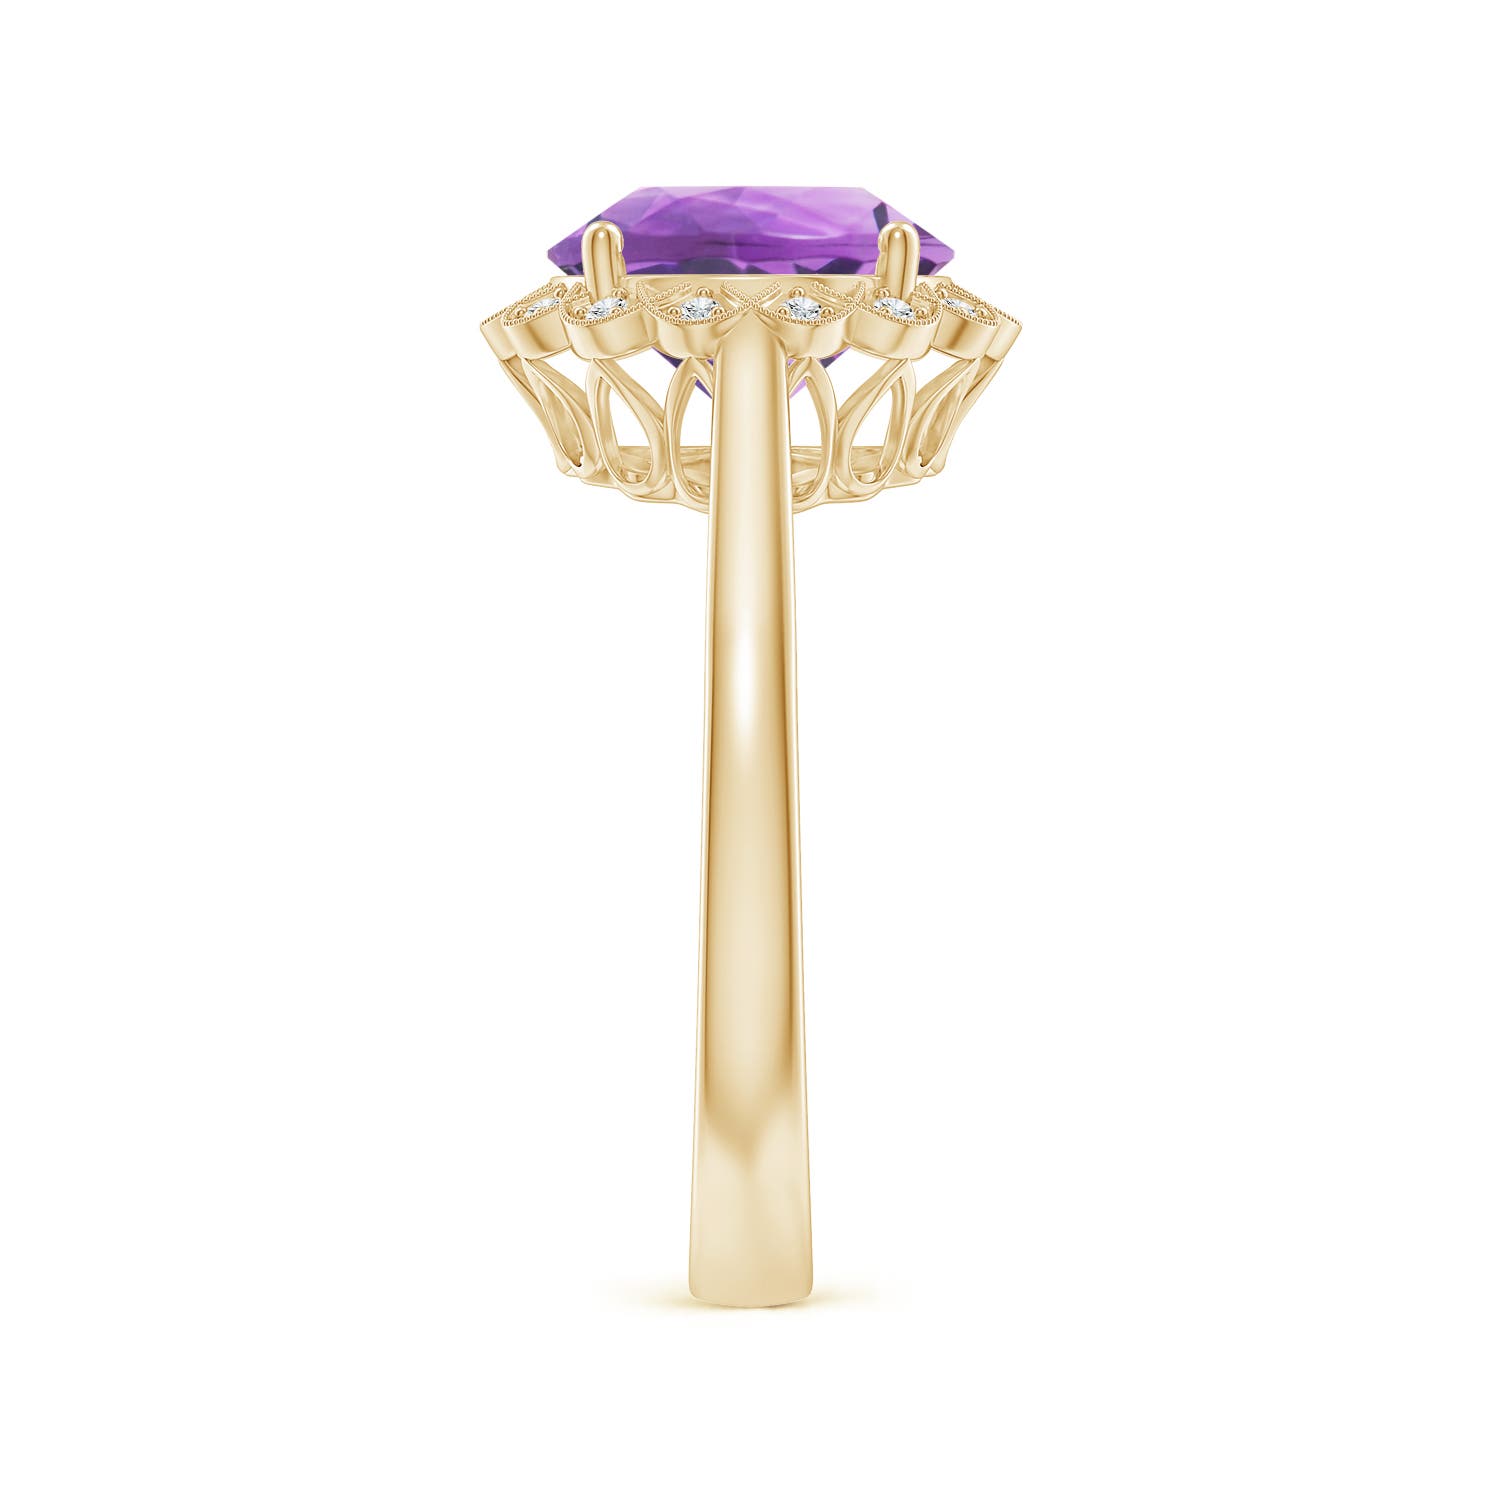 A - Amethyst / 2.52 CT / 14 KT Yellow Gold